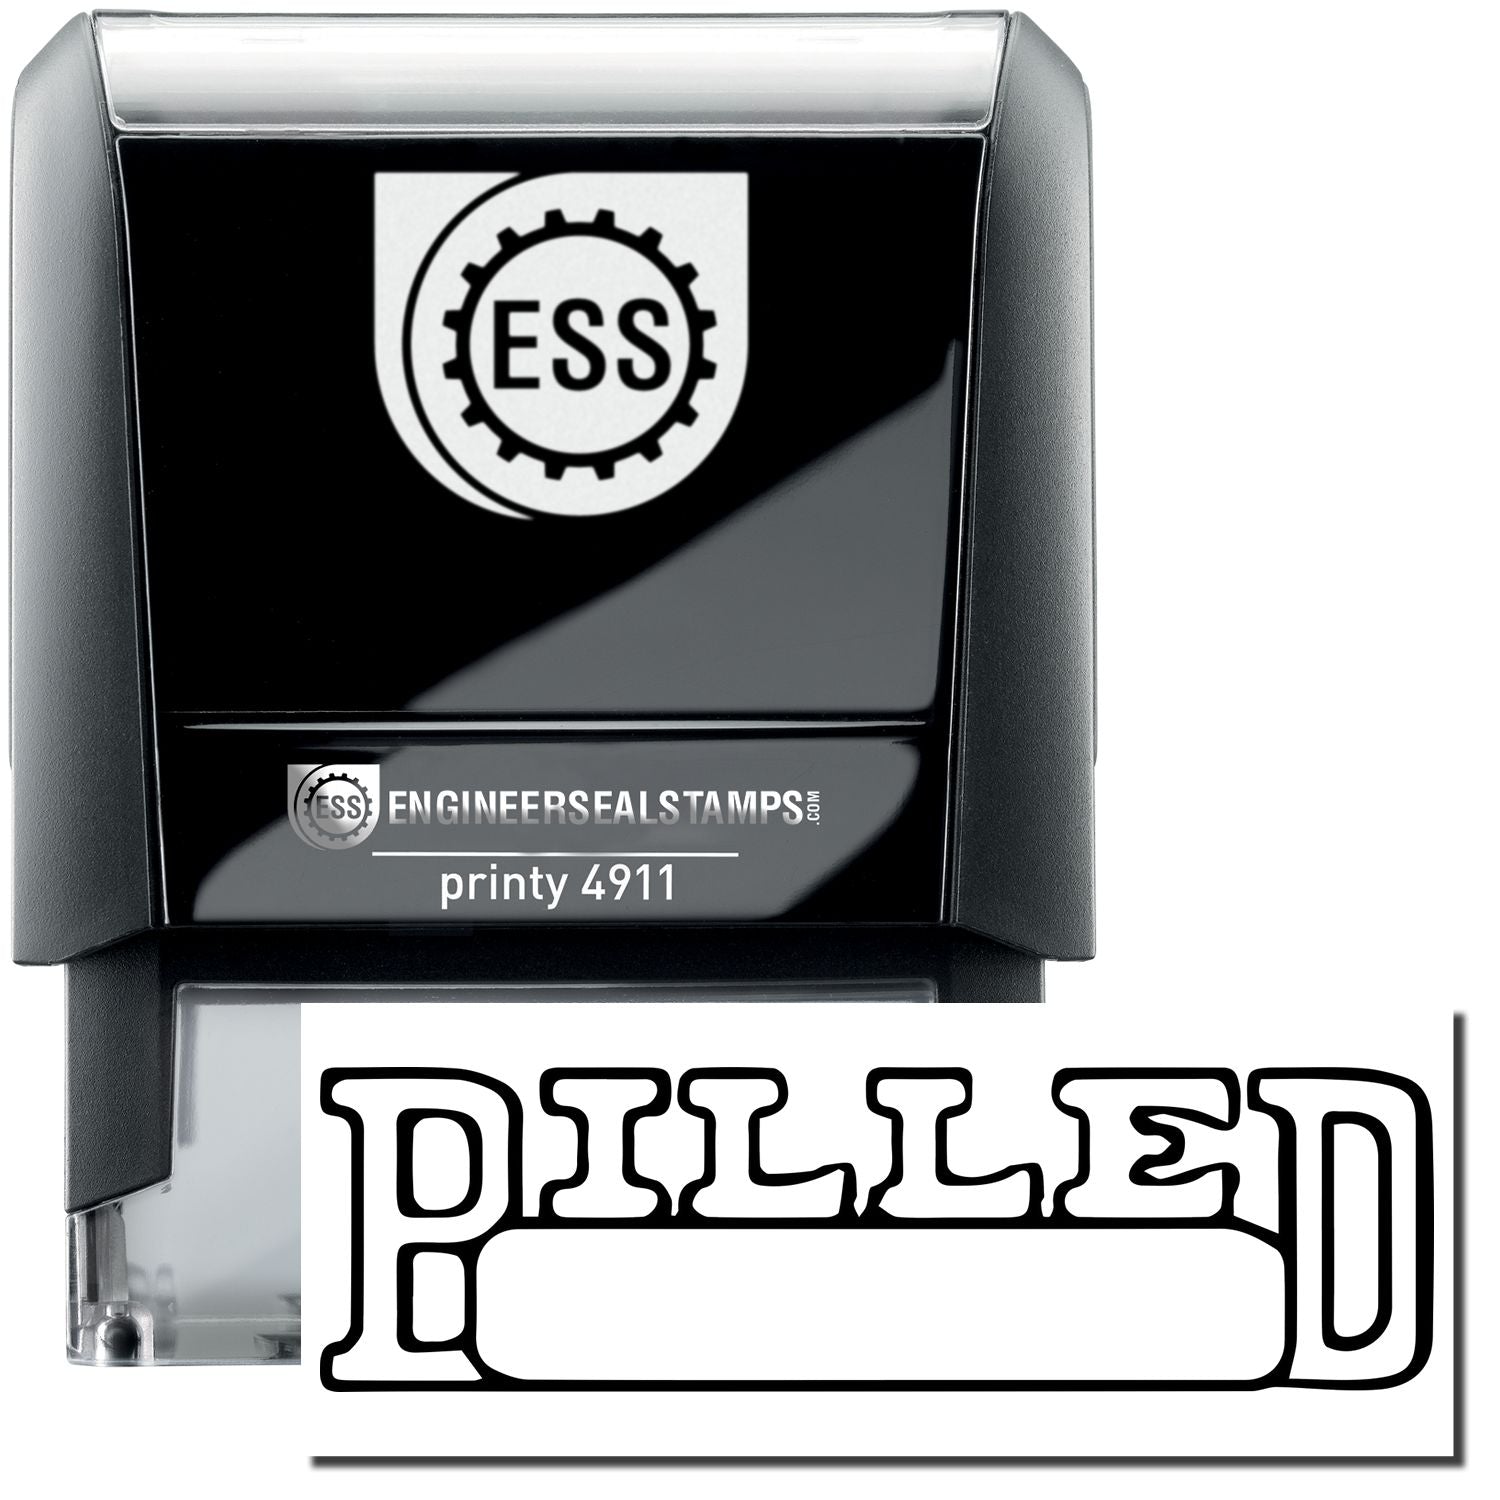 A self-inking stamp with a stamped image showing how the text "BILLED" in an outline font with a date box underneath is displayed after stamping.